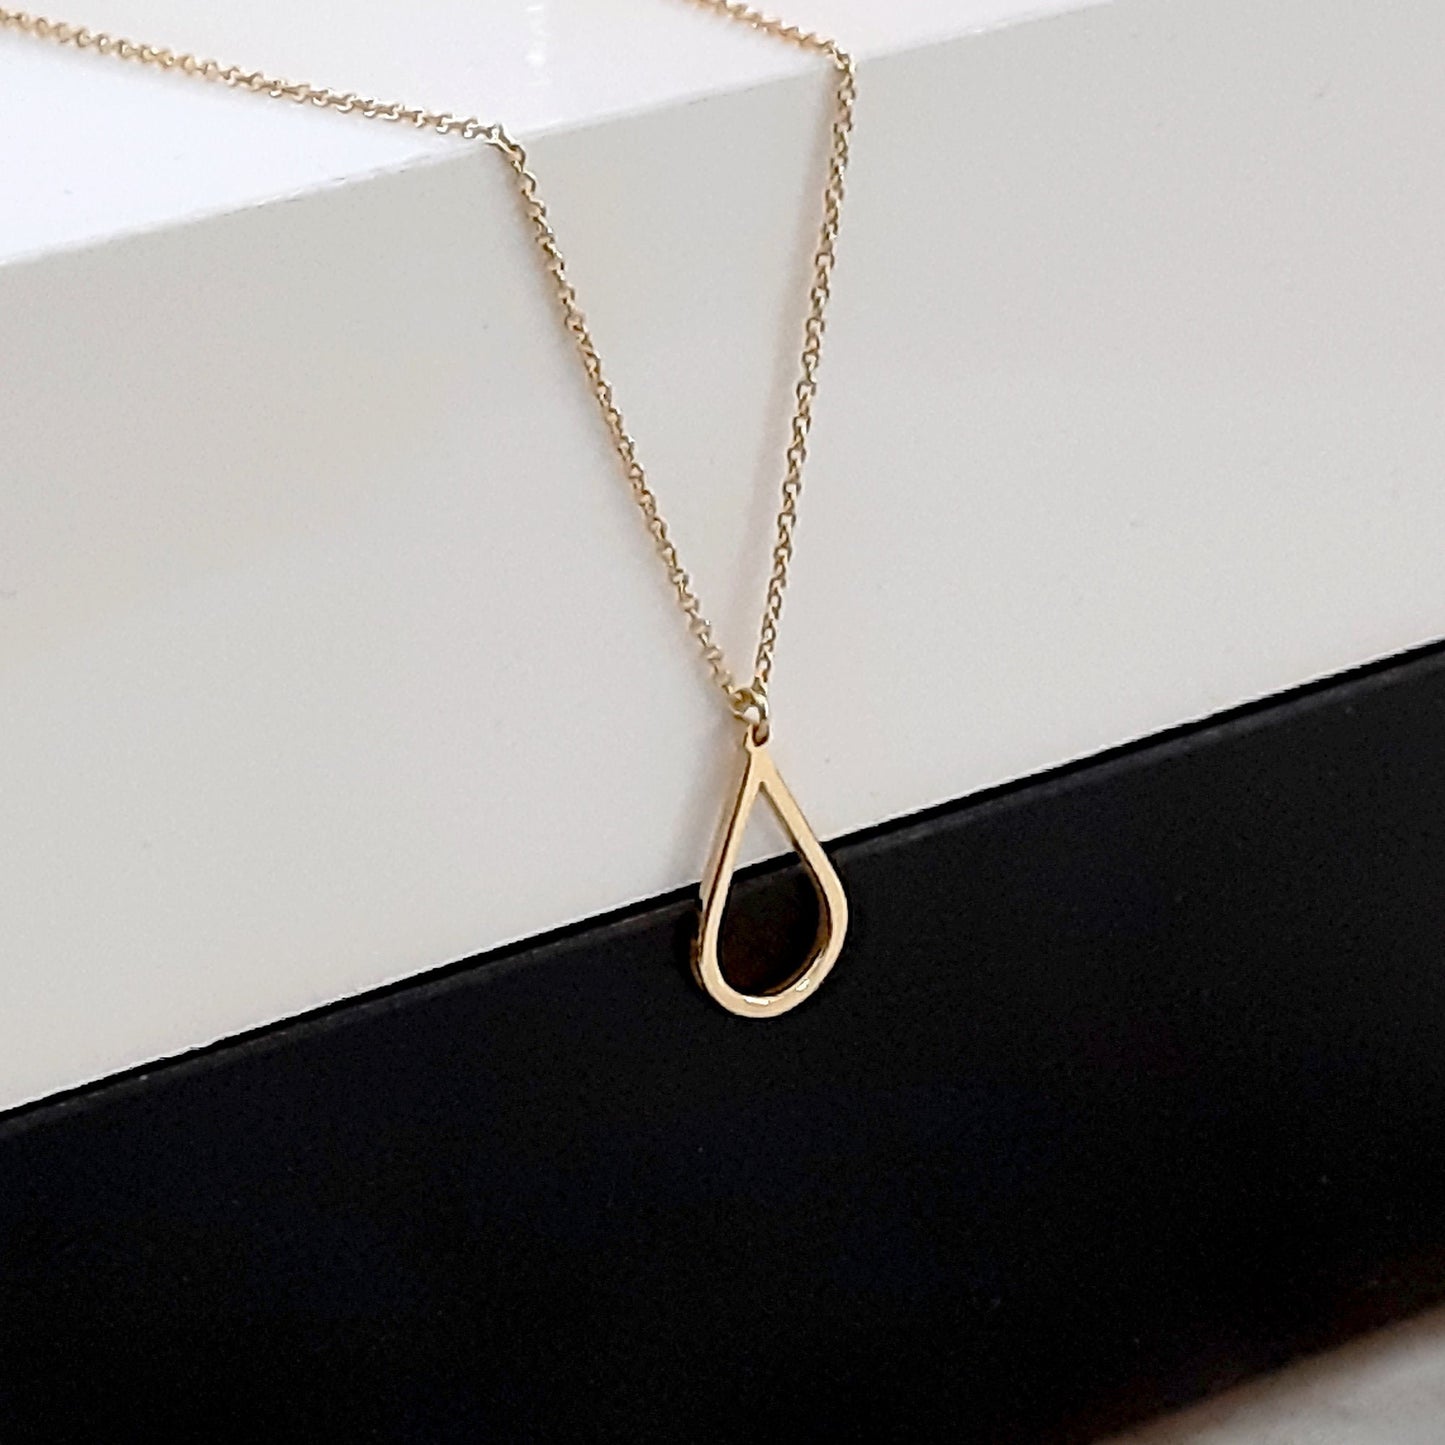 14k yellow Gold Teardrop necklace, solid gold Dainty Thin chain, Teardrop layering necklace, Minimalist necklace 14k layered necklace